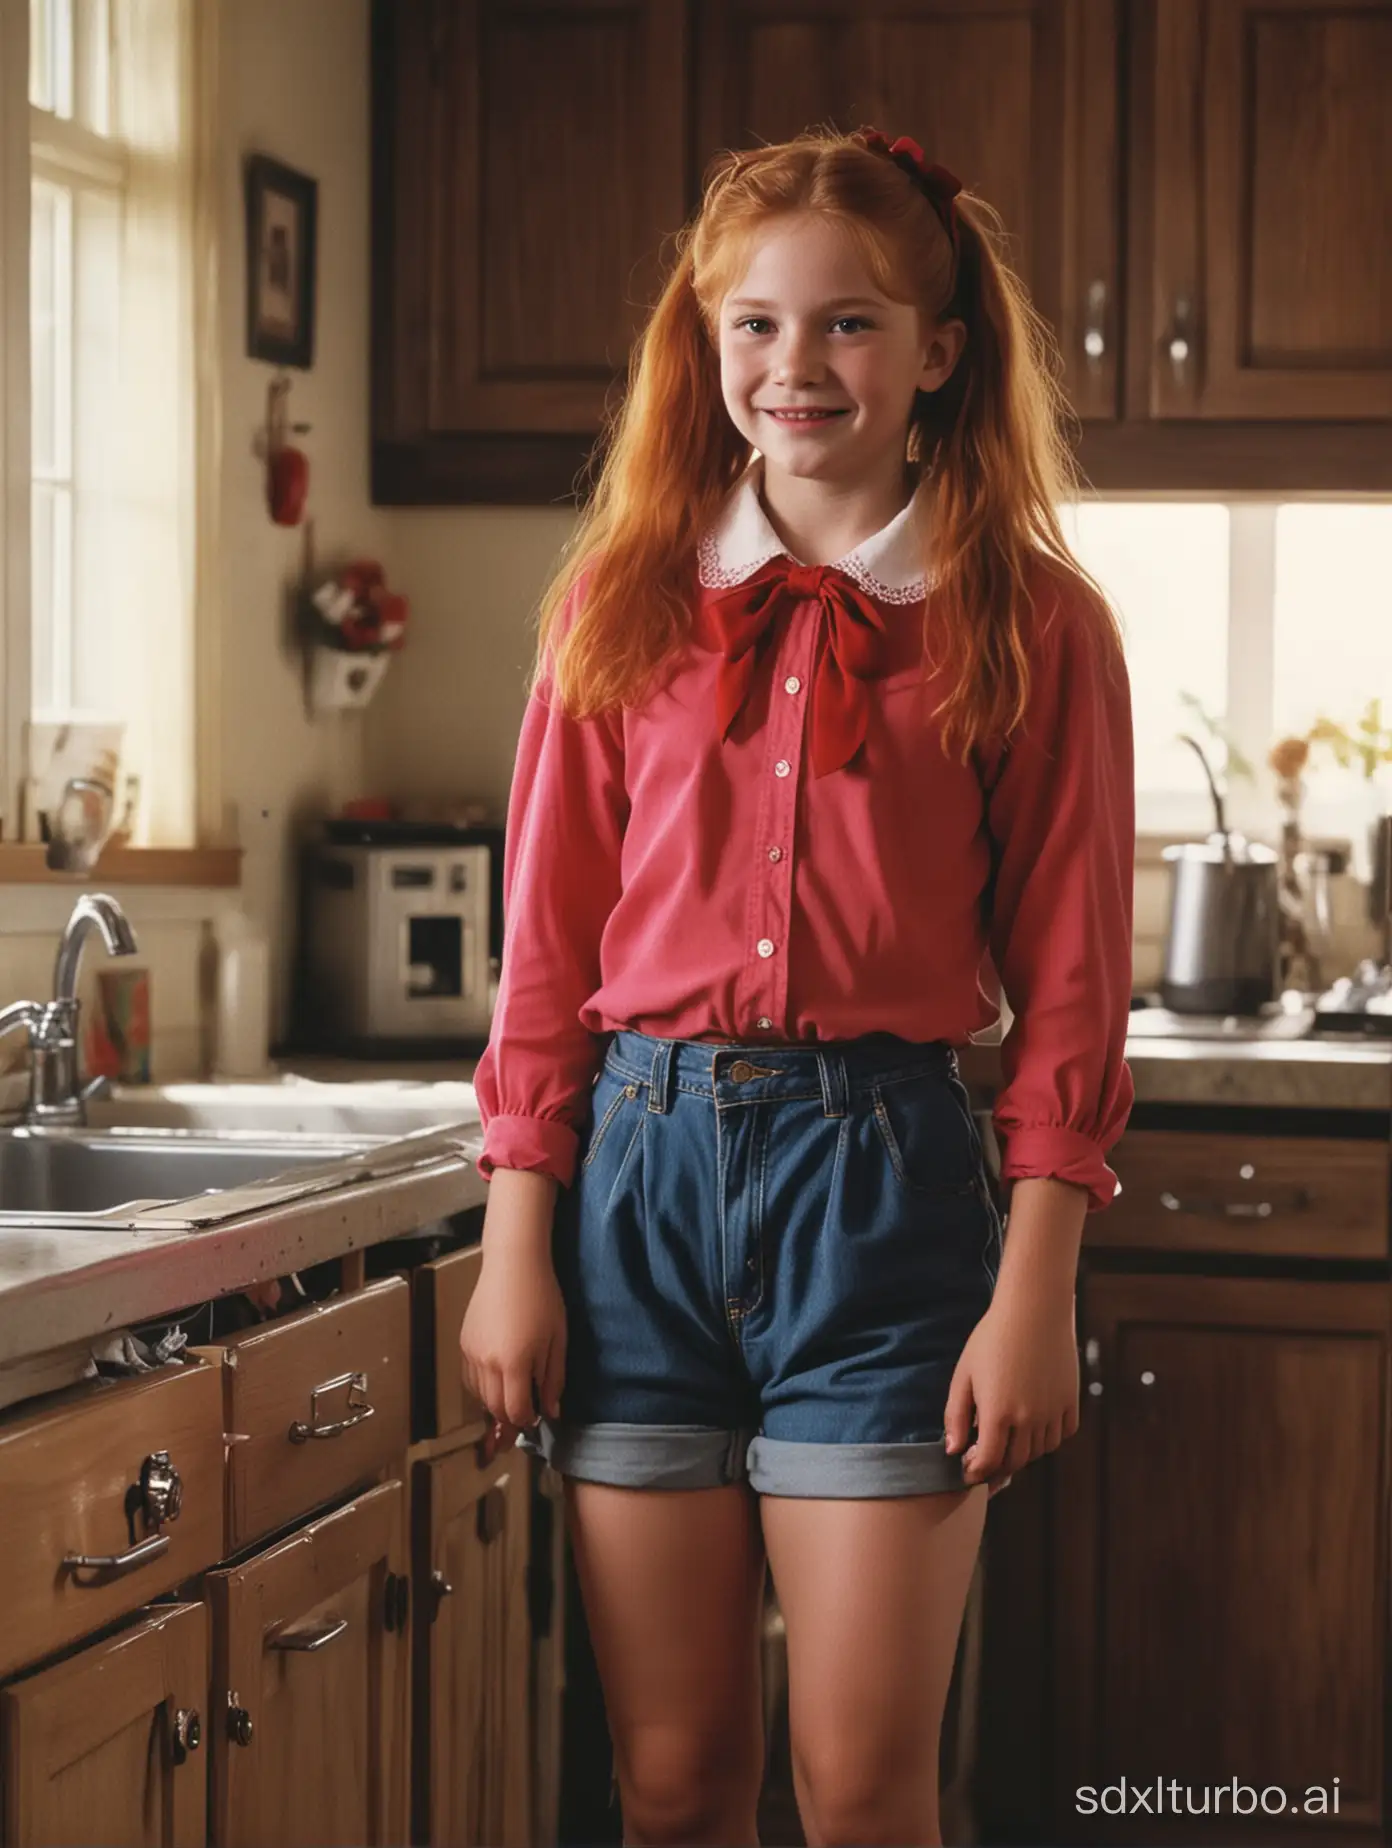 Enigmatic-Thriller-Smiling-RedHaired-Girl-in-Mysterious-Kitchen-Scene